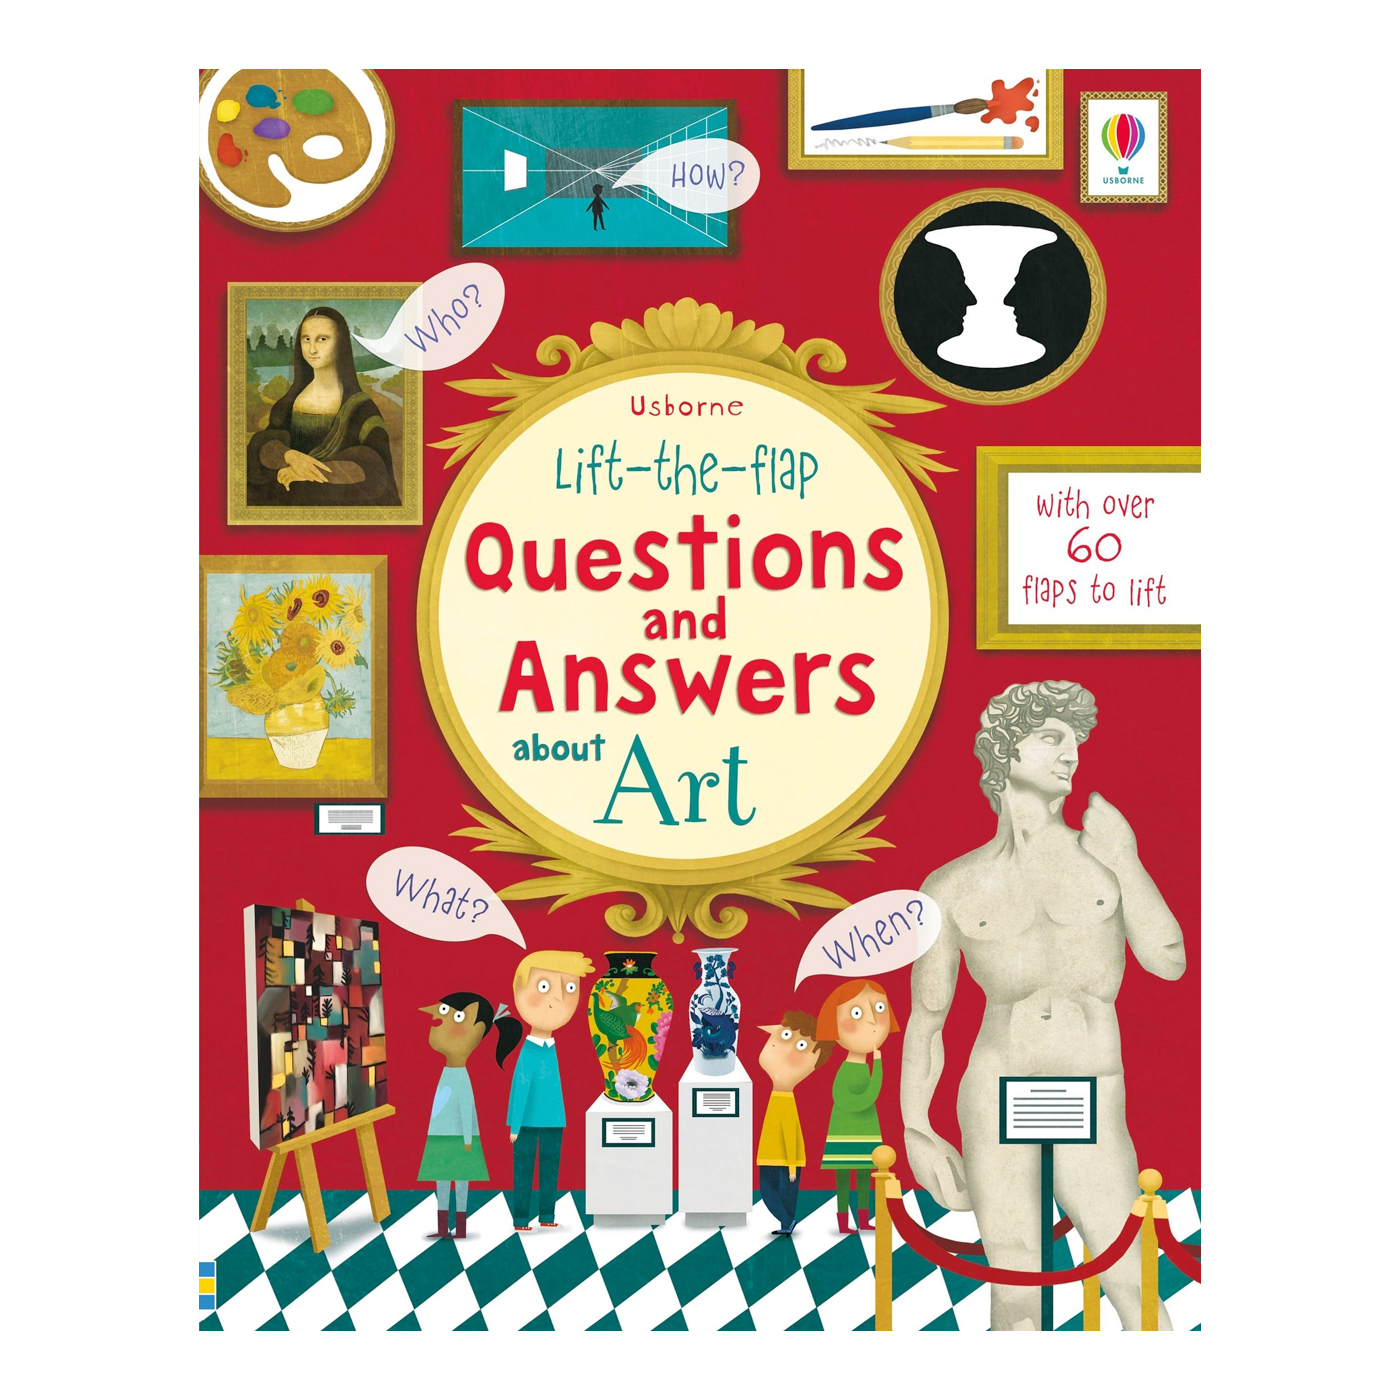  Lift-the-flap Questions and Answers about Art